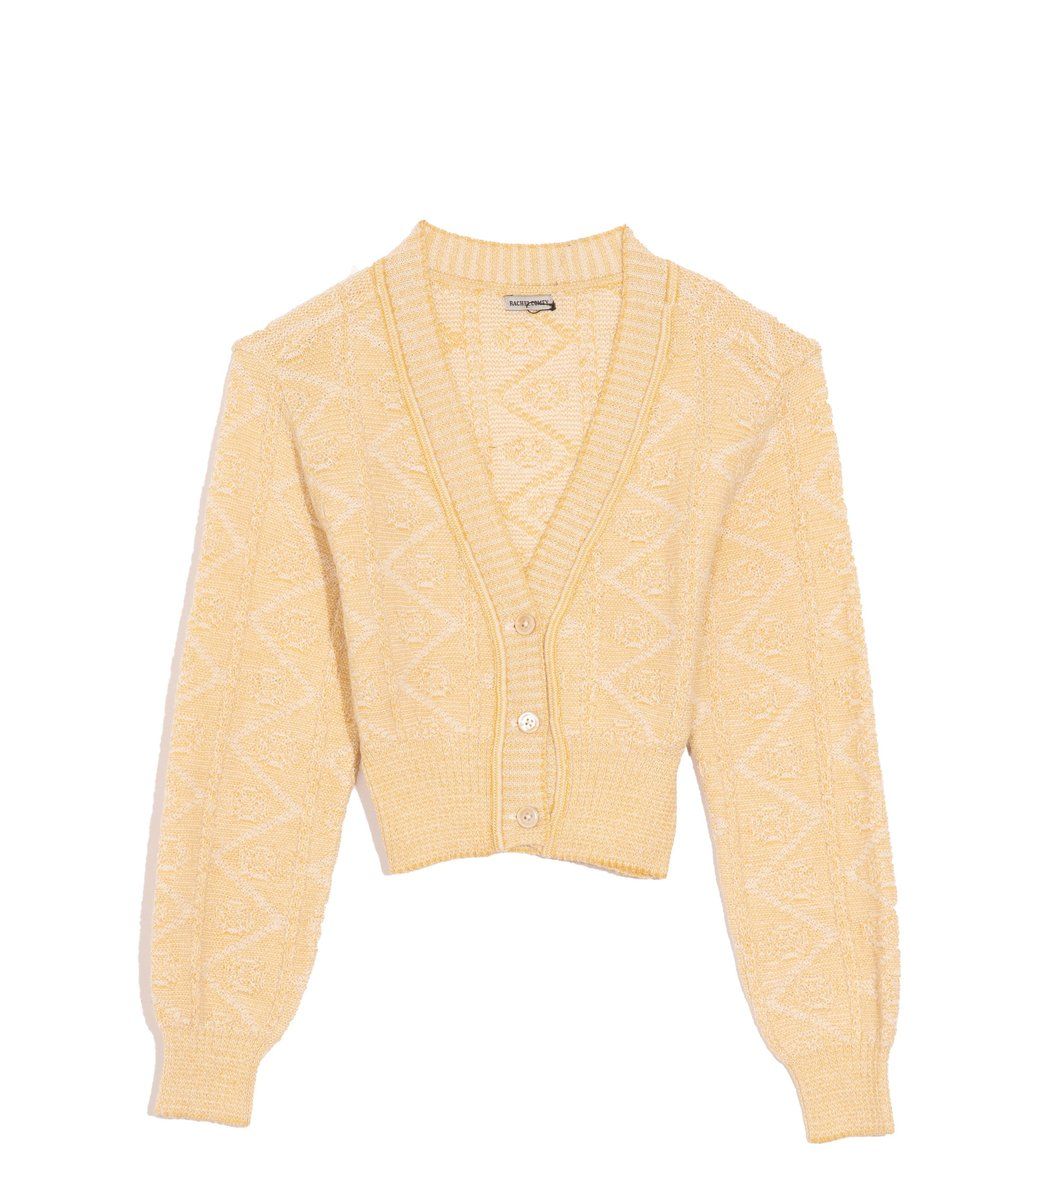 where to buy cardigan sweaters